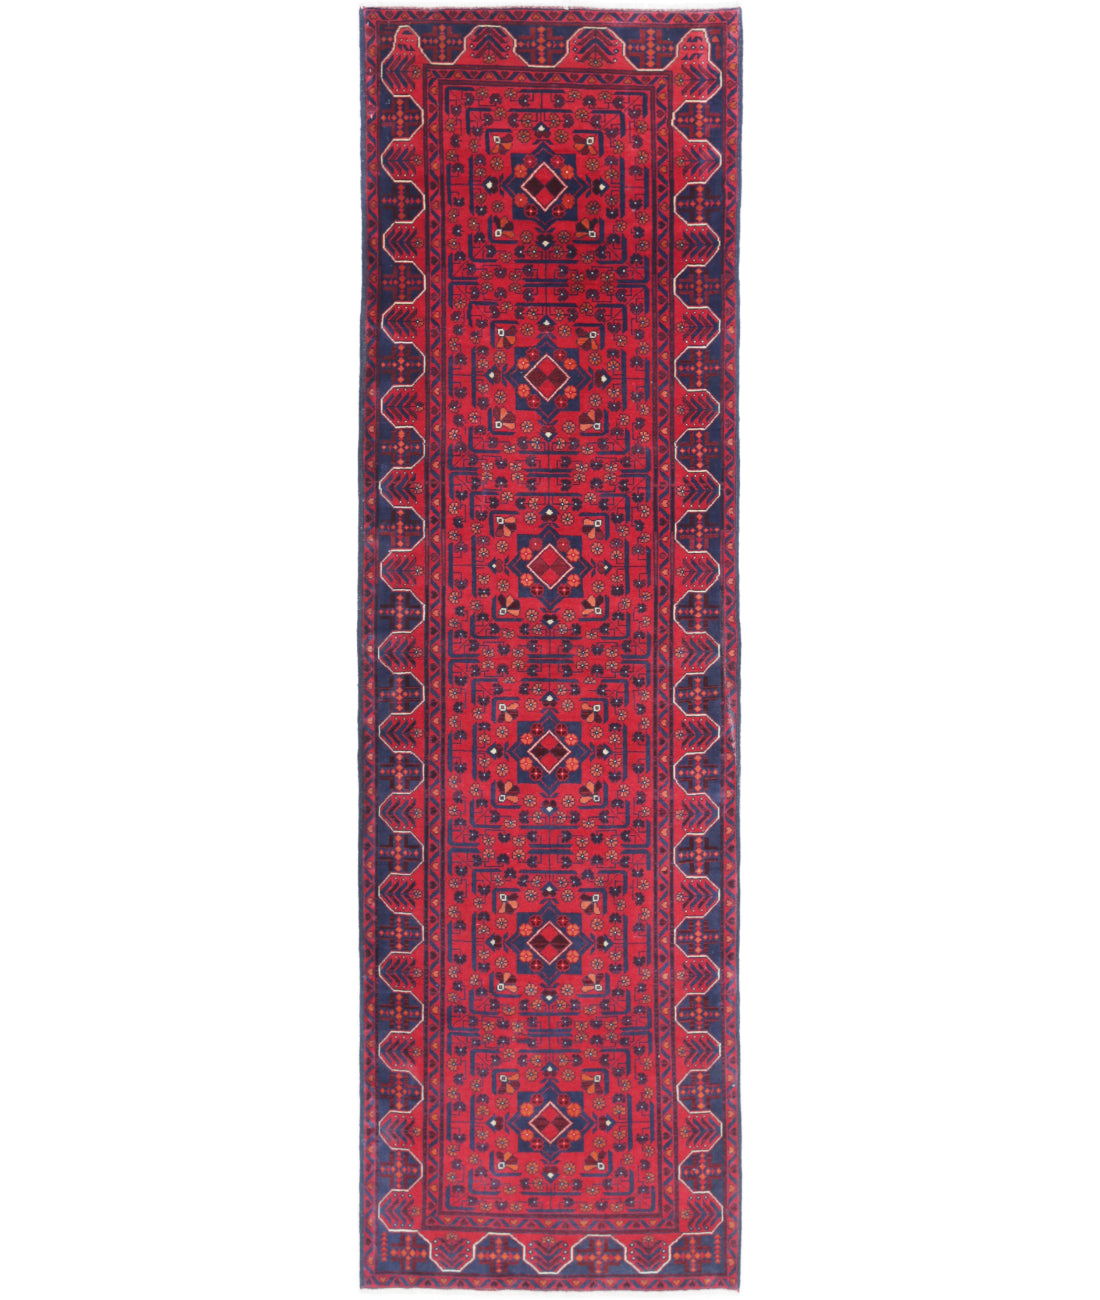 Hand Knotted Afghan Khamyab Wool Rug - 2&#39;8&#39;&#39; x 9&#39;6&#39;&#39; 2&#39;8&#39;&#39; x 9&#39;6&#39;&#39; (80 X 285) / Red / Red